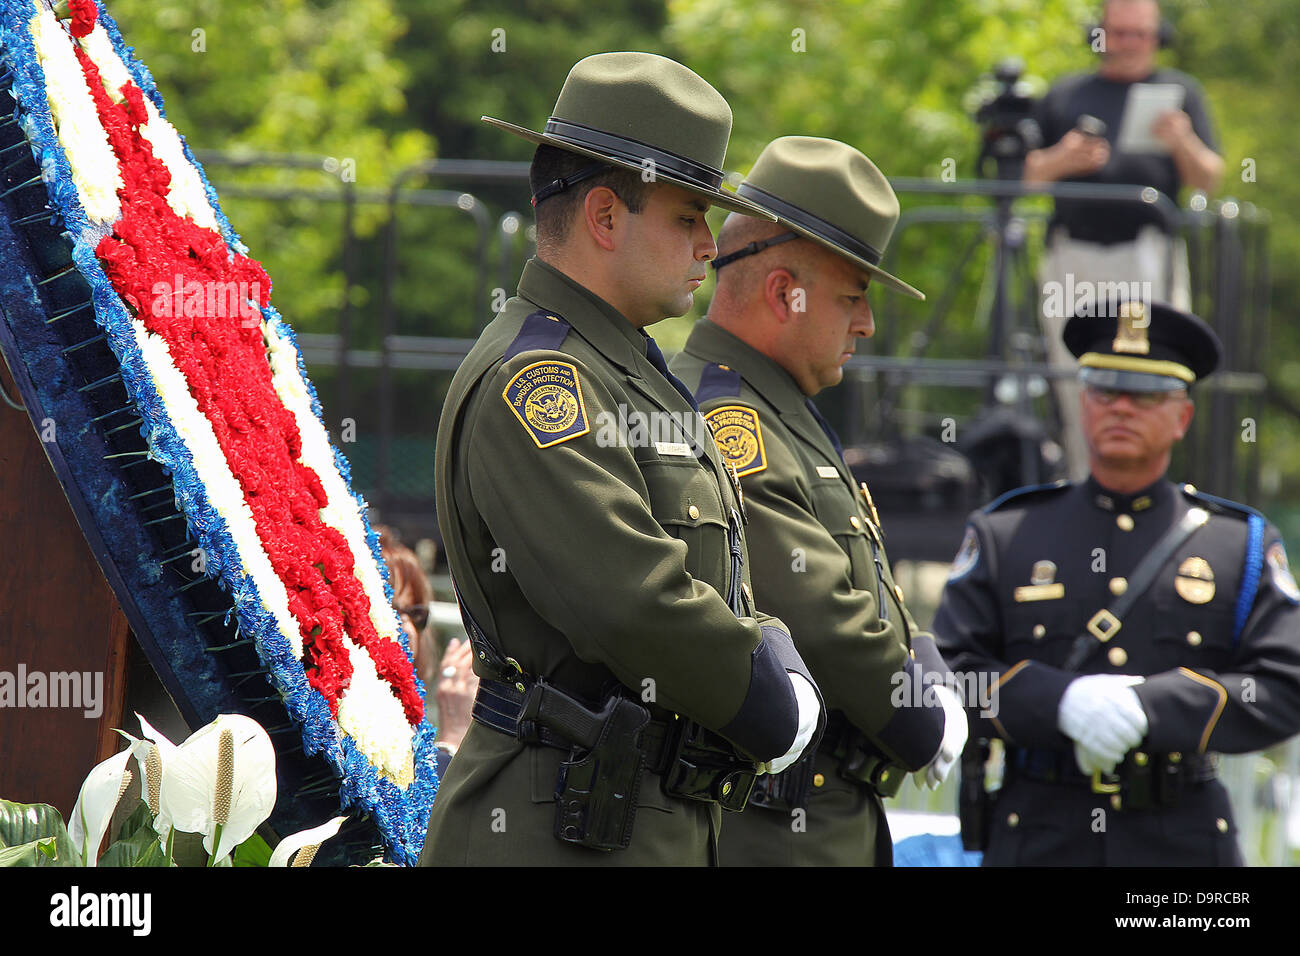 001 Polizei Woche 2013 32. National Peace Officers Memorial Service. Stockfoto